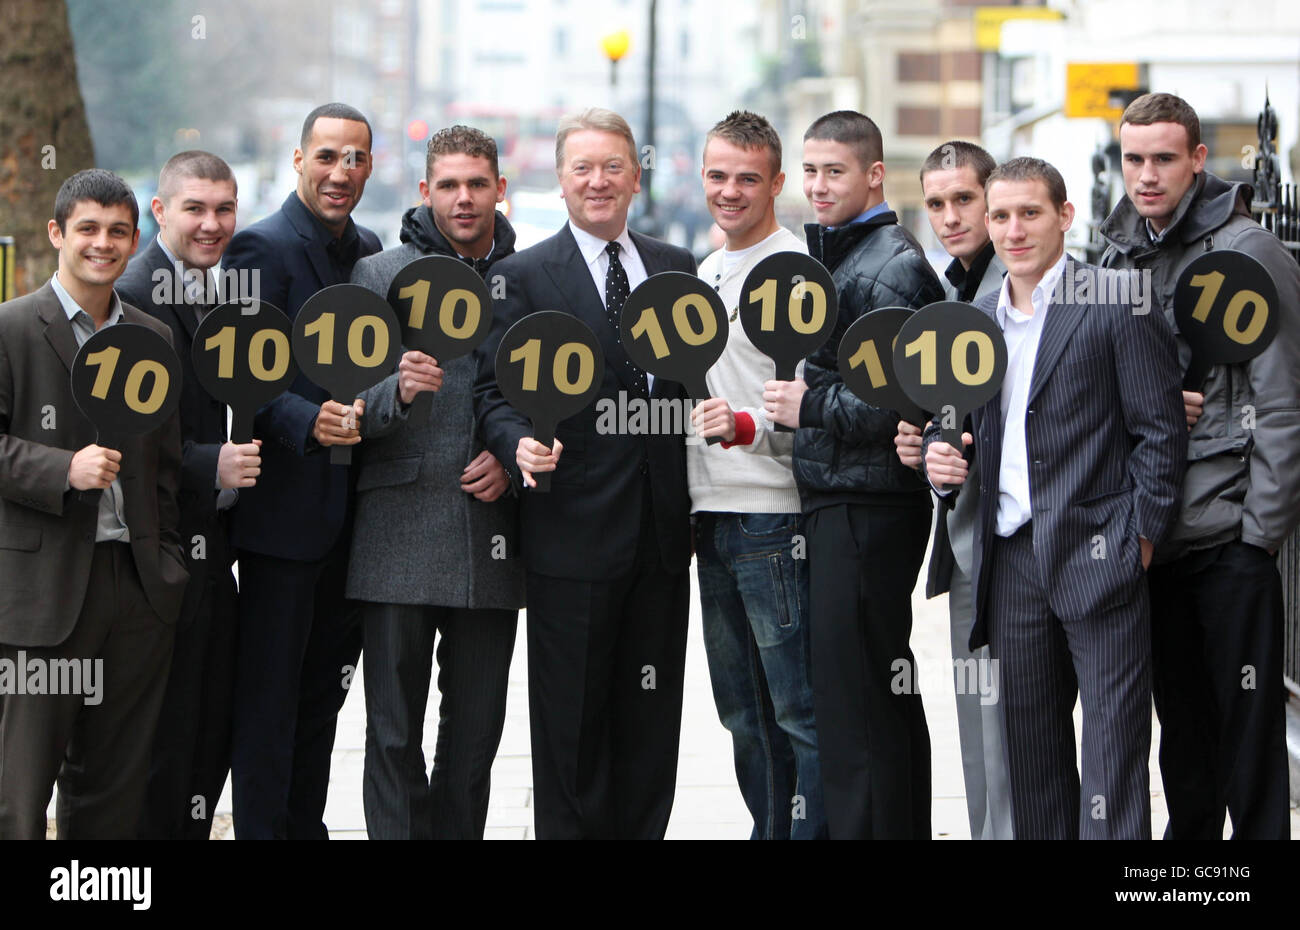 Frank Warren (centre) with (left to right) Stephen Smih, Liam Smith, James DeGale MBE, Billy Joe Saunders, Frankie Gavin, Ronnie Heffron, Liam Walsh, Thomas Costello and Ryan Walsh during the press conference at The Landmark Hotel, London. Stock Photo